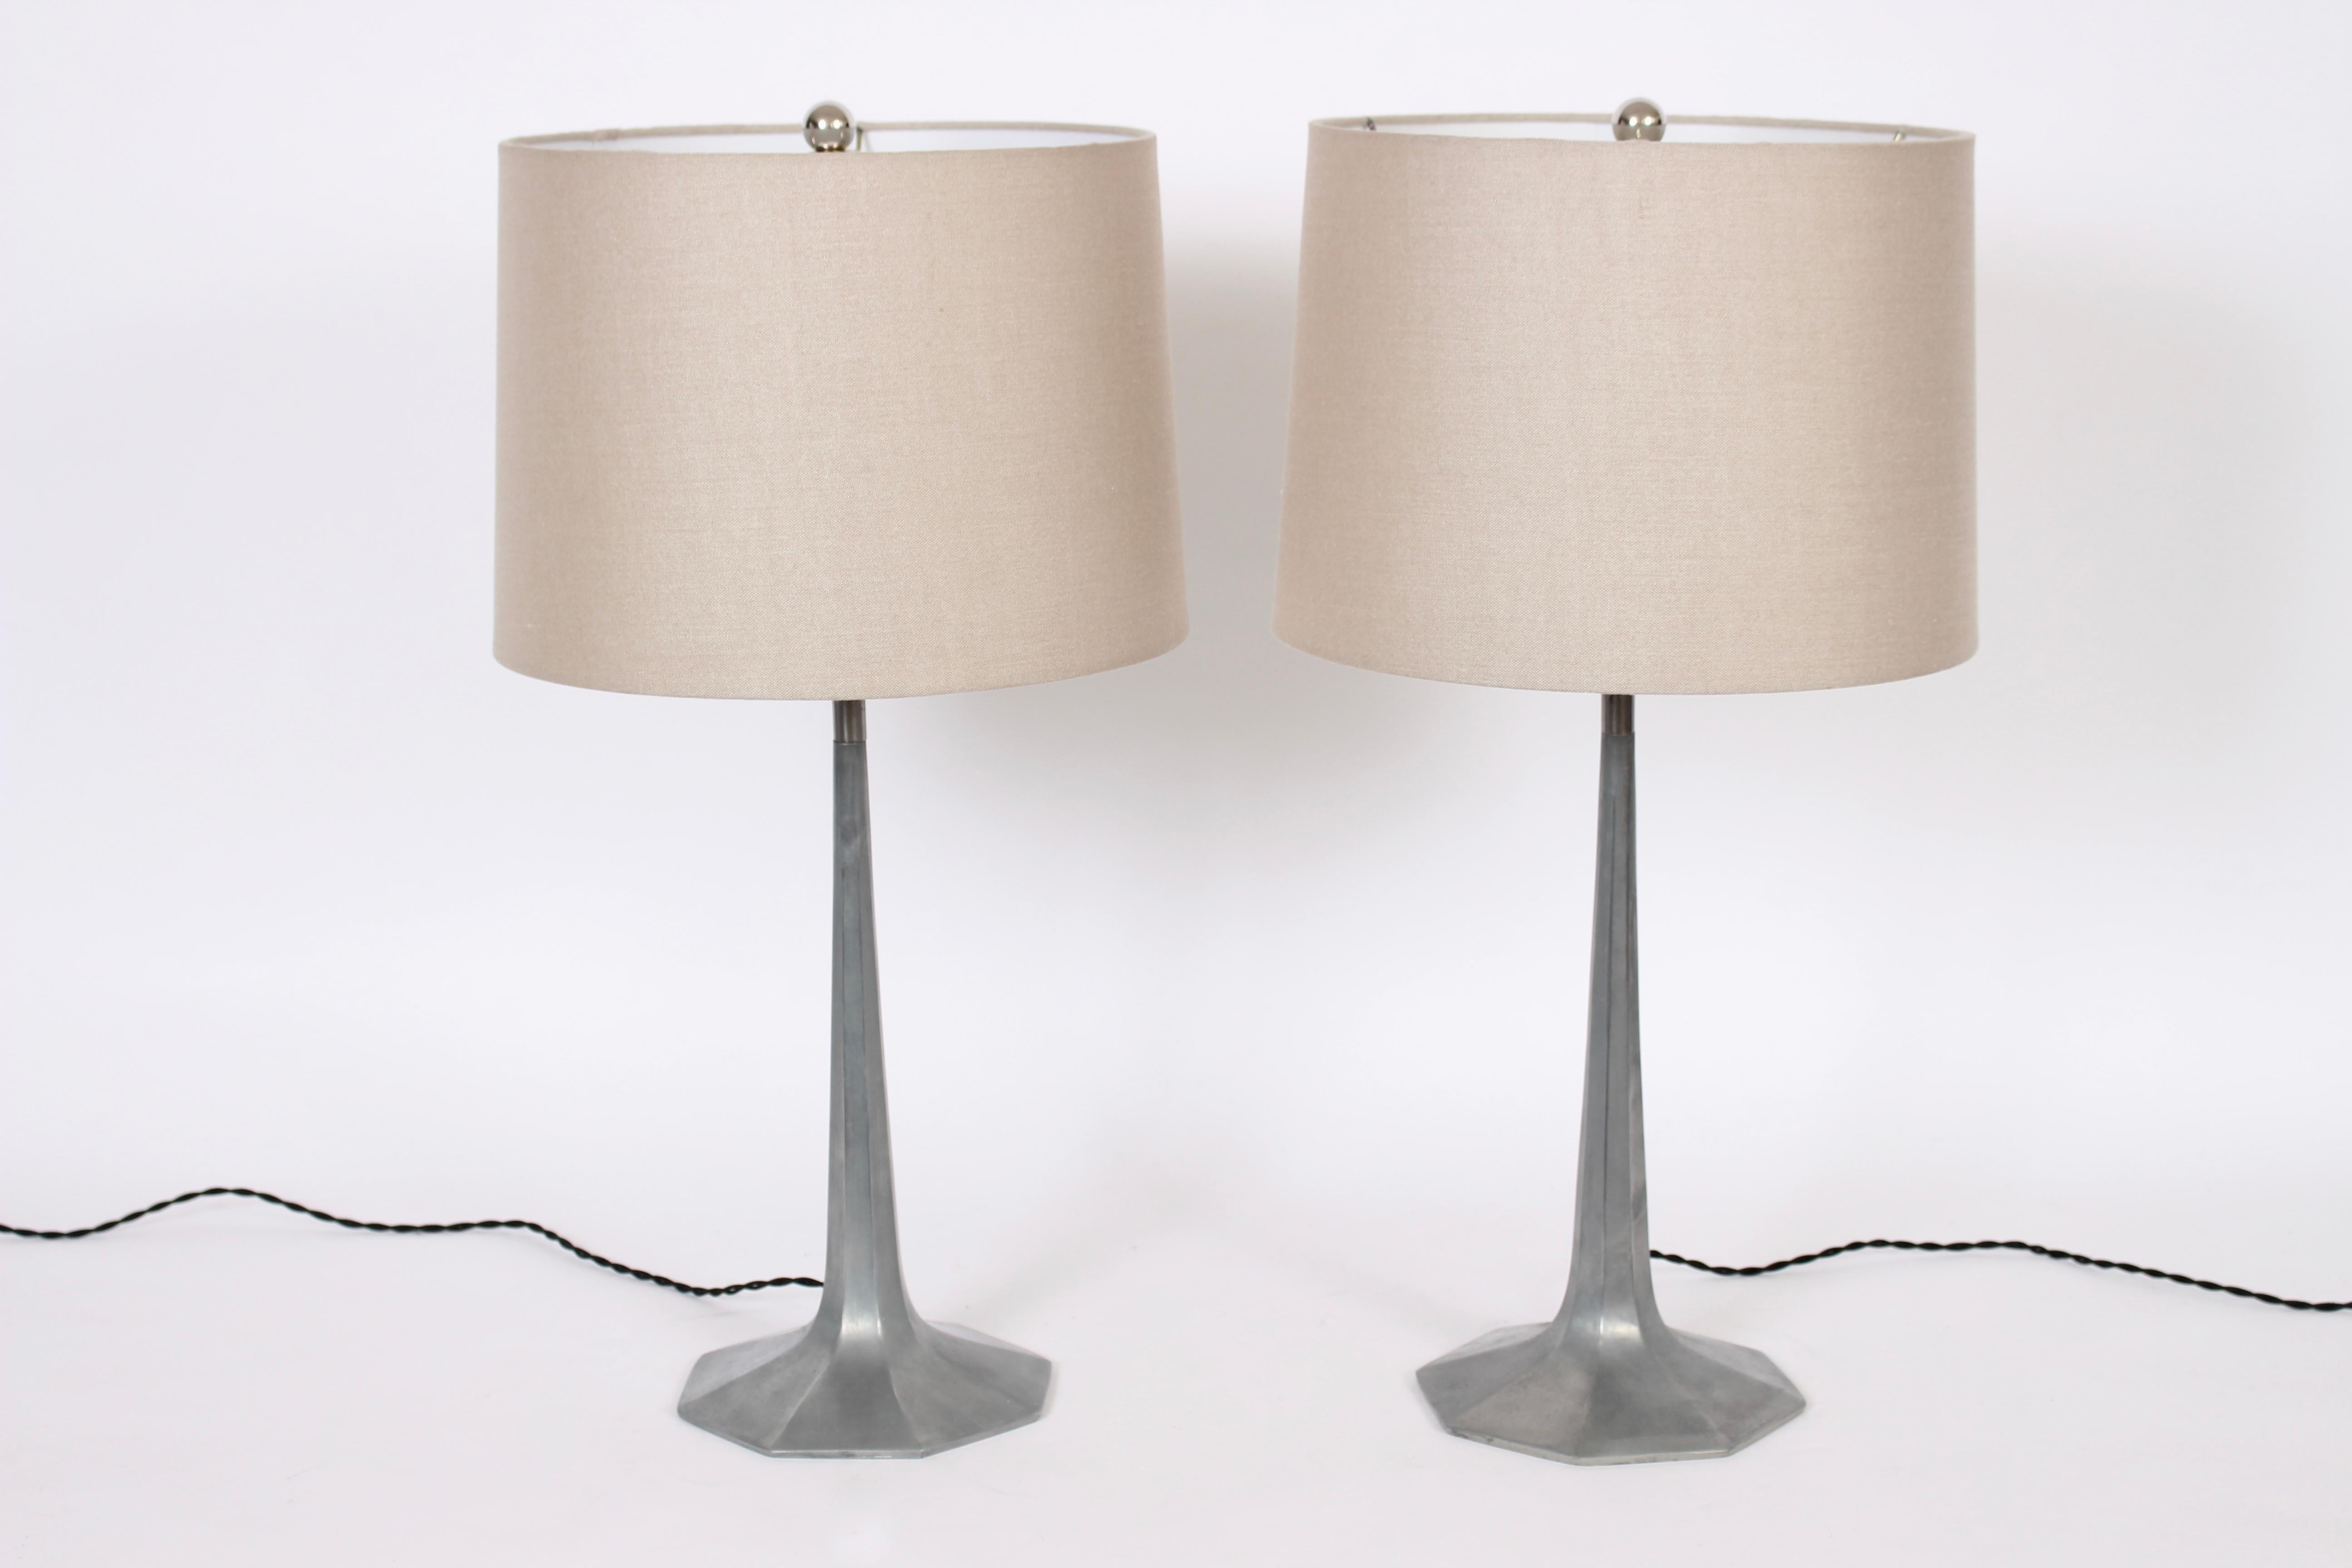 Pair of Laurel Lamp Manufacturing Company gray aluminum tree like table lamps, circa 1960. featuring a smooth eight sided base and stem with brass socket cover and original harp. abstract. sculptural. small footprint. 18H to top of socket. Shades